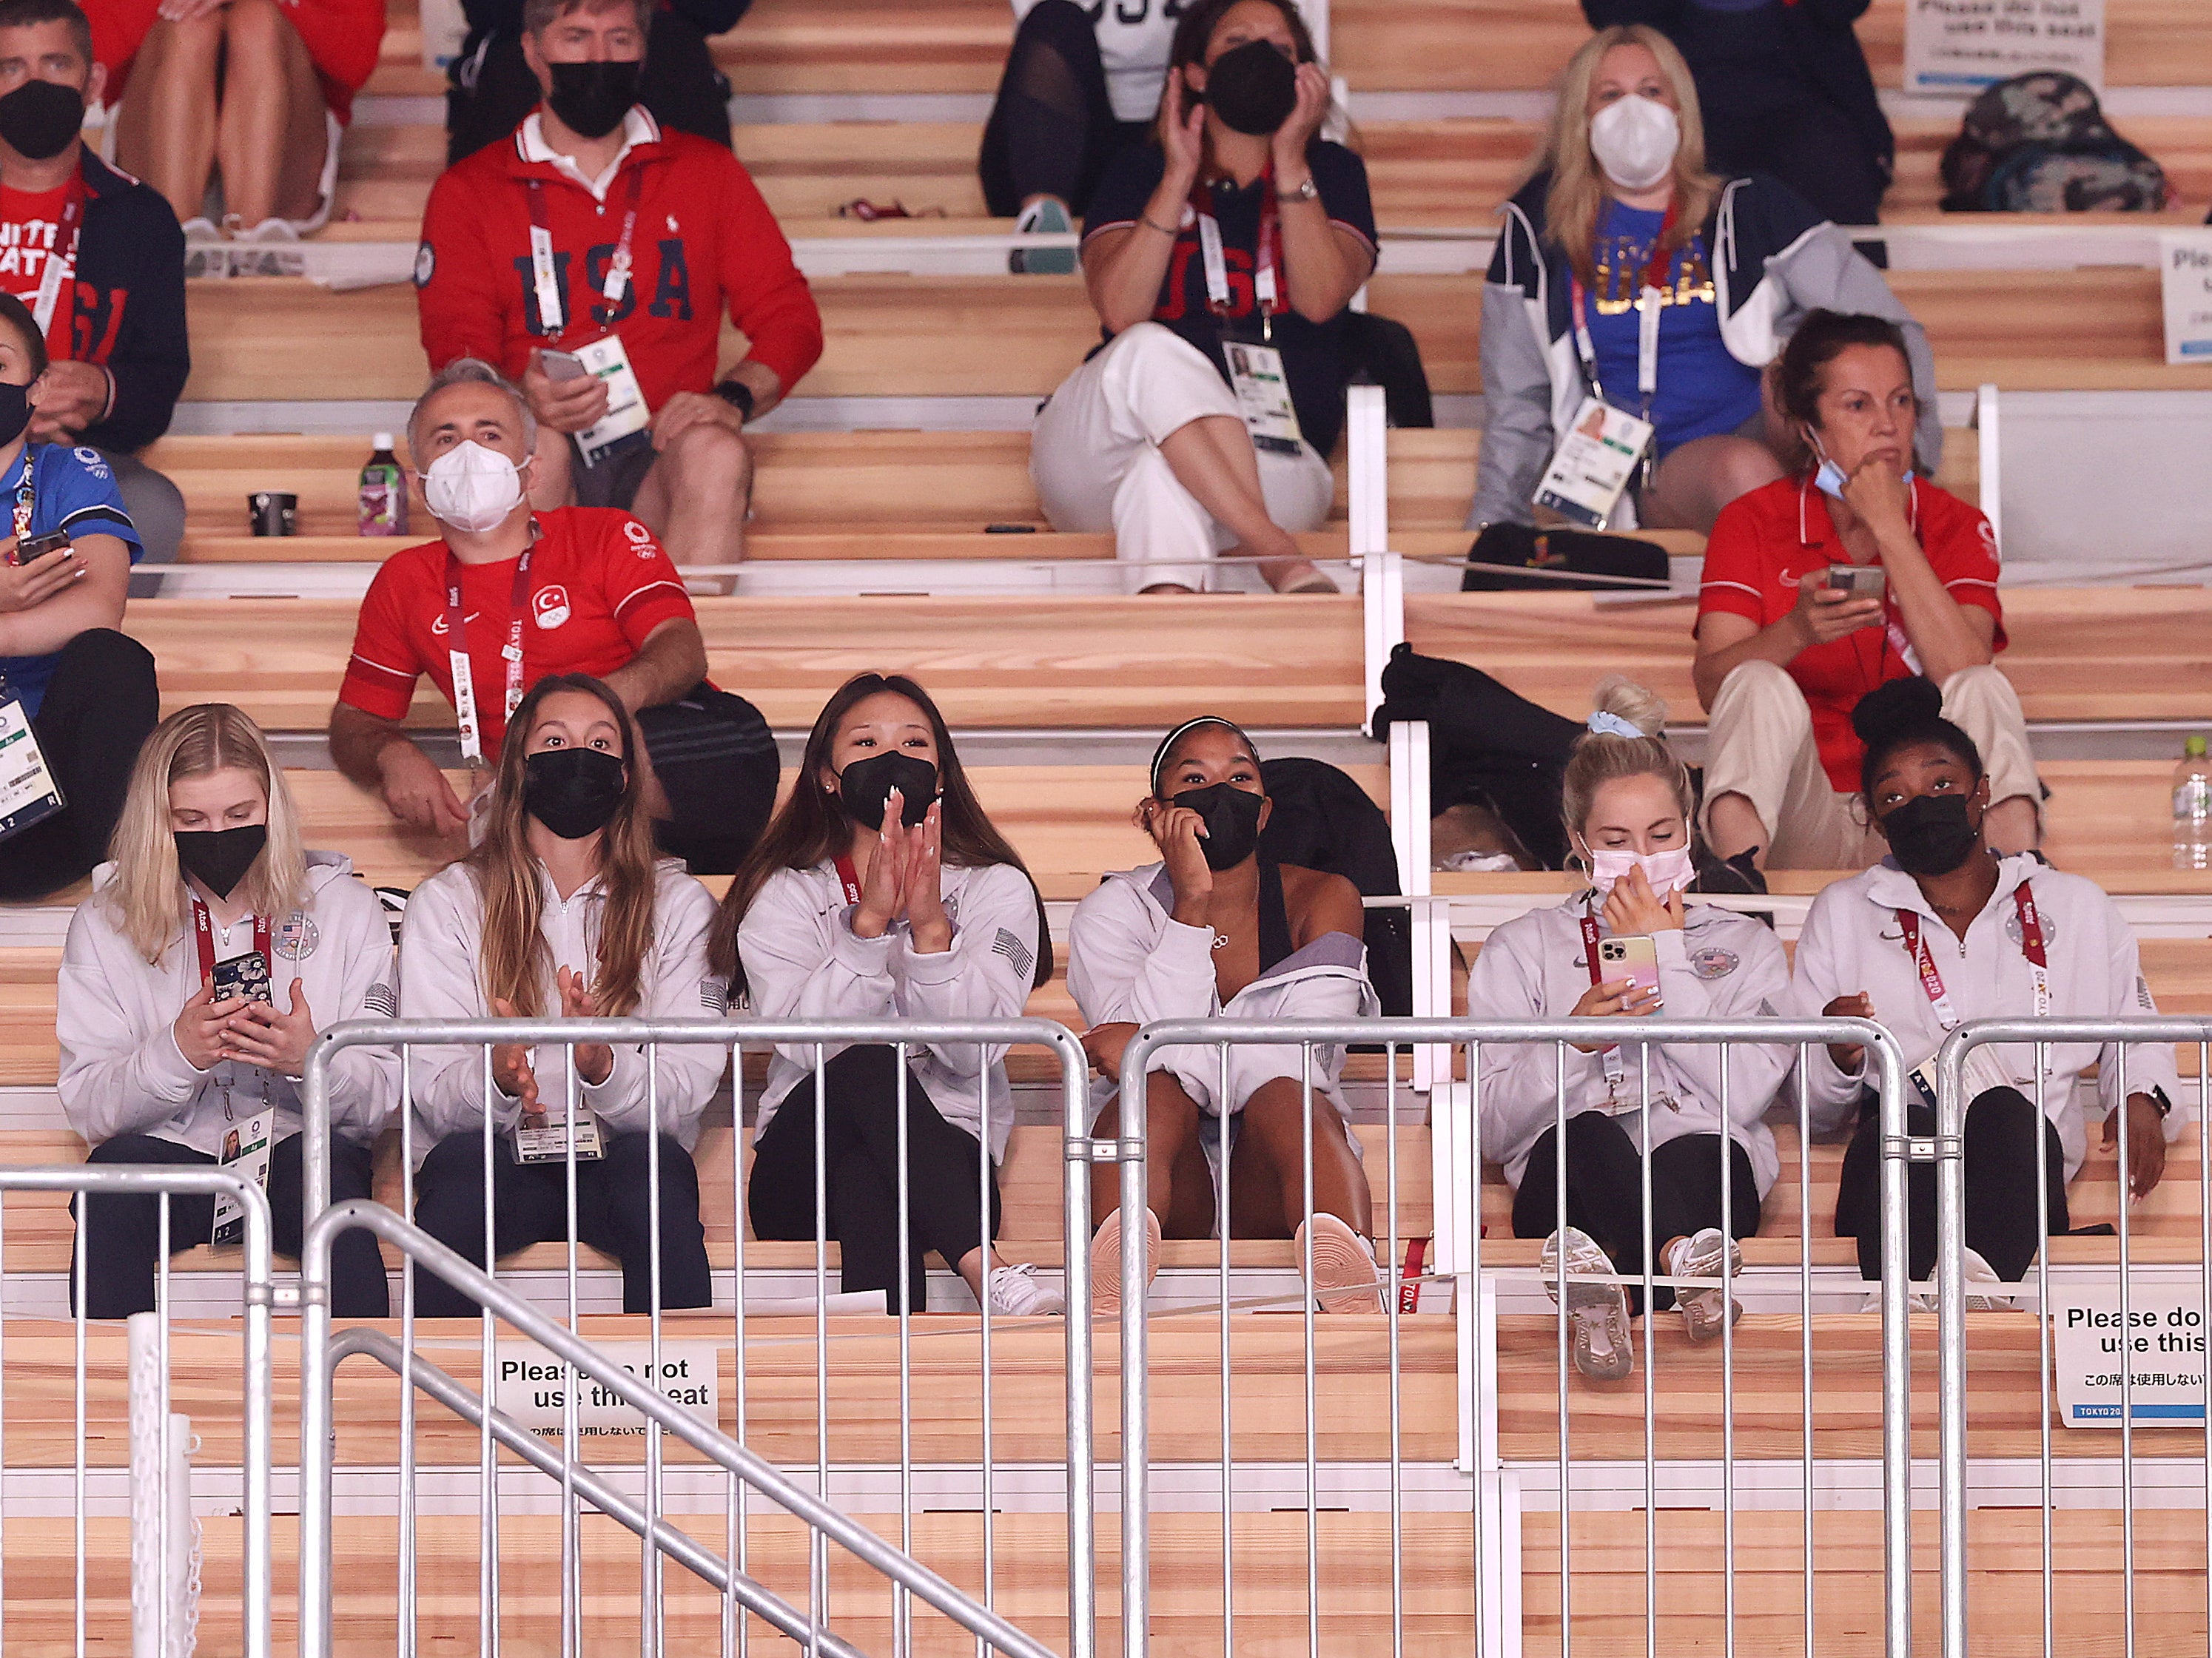 Members of the US women’s gymnastics team attend the men’s qualifications on day one of the Tokyo 2020 Olympic Games at Ariake Gymnastics Centre on July 24, 2021 in Tokyo, Japan.